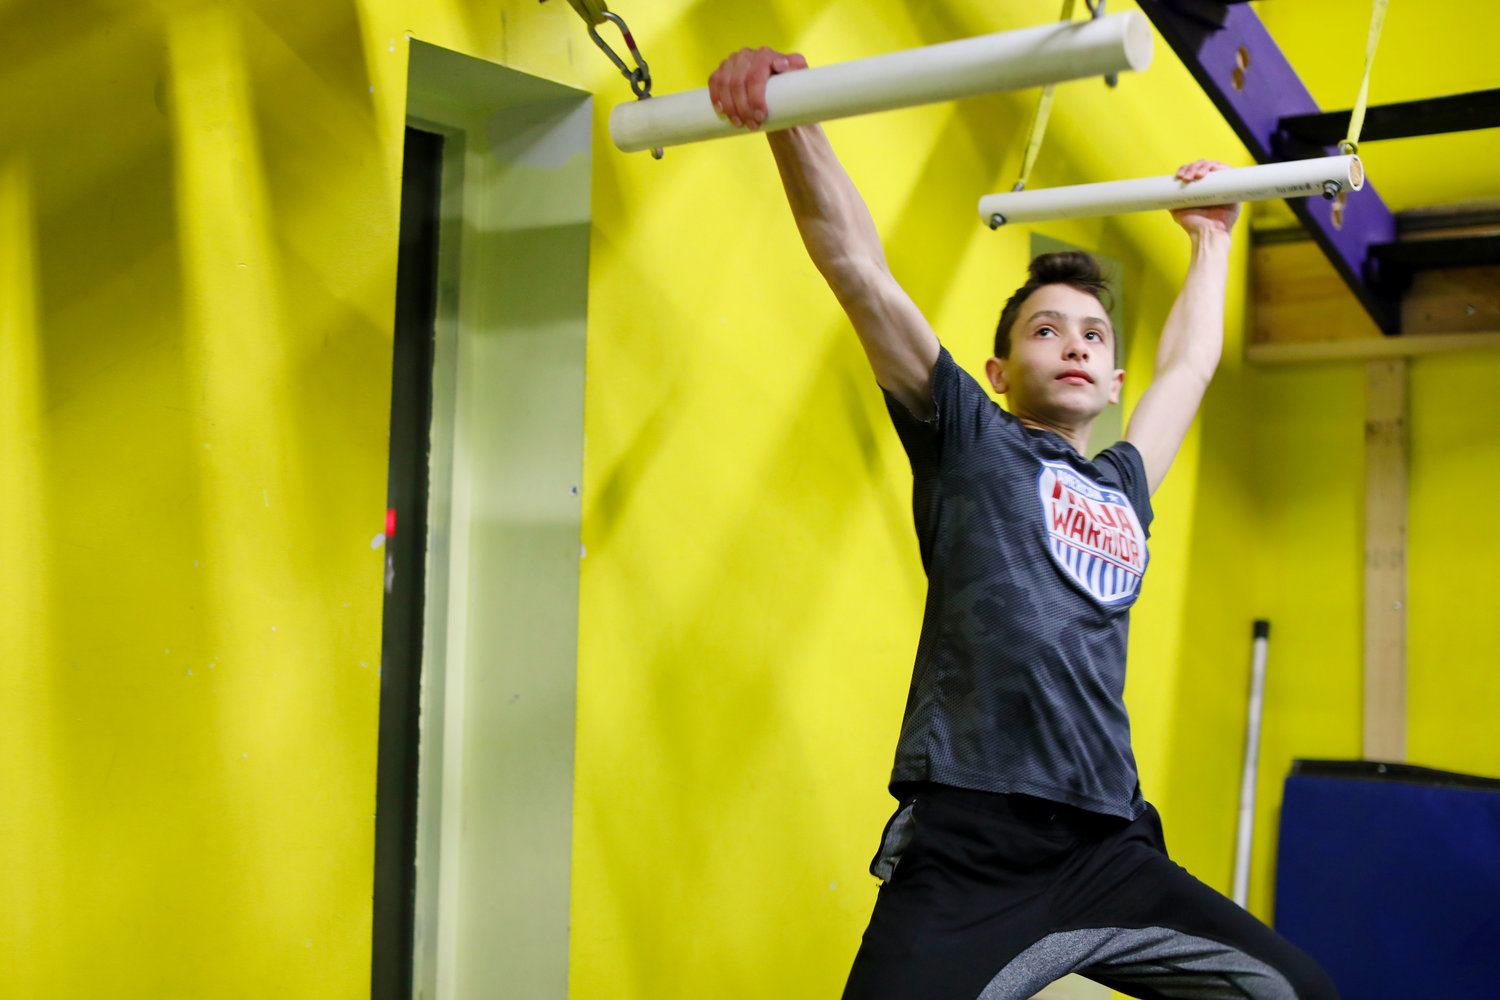 Carson Dean, 13, trains at his at his gym Laid-back Fitness in Warwick.